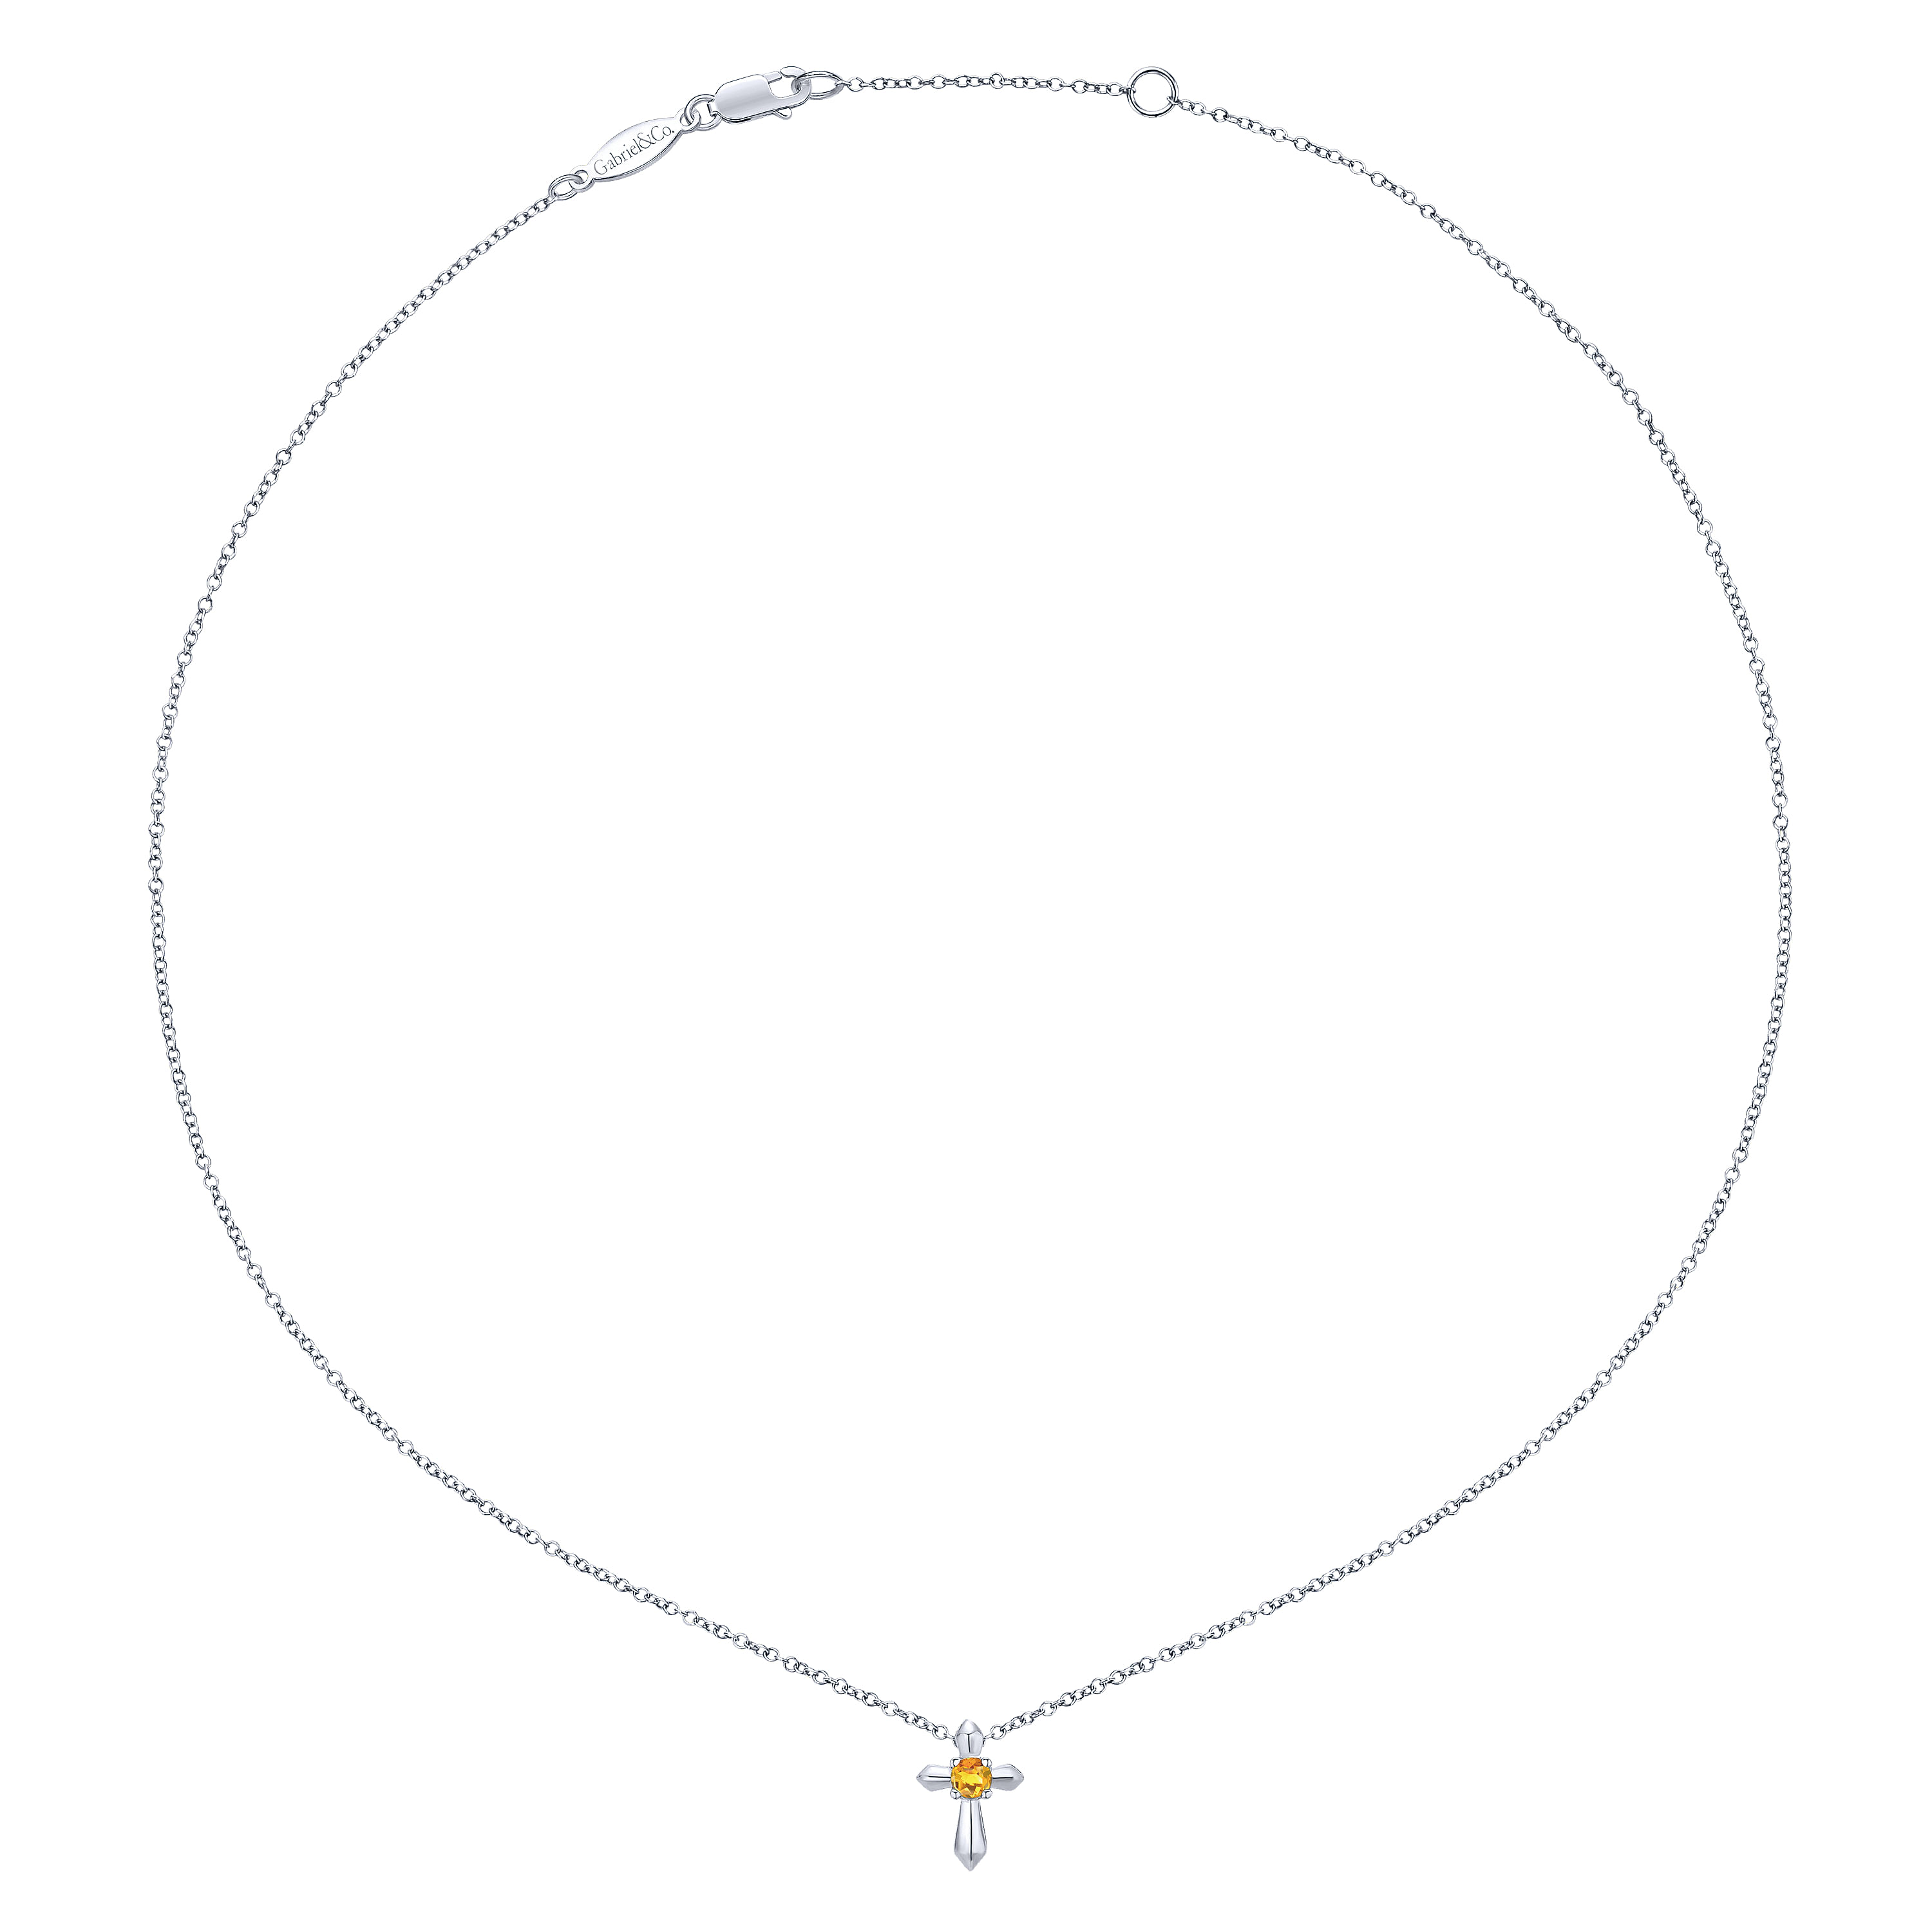 925 Sterling Silver Round Citrine Cross Necklace